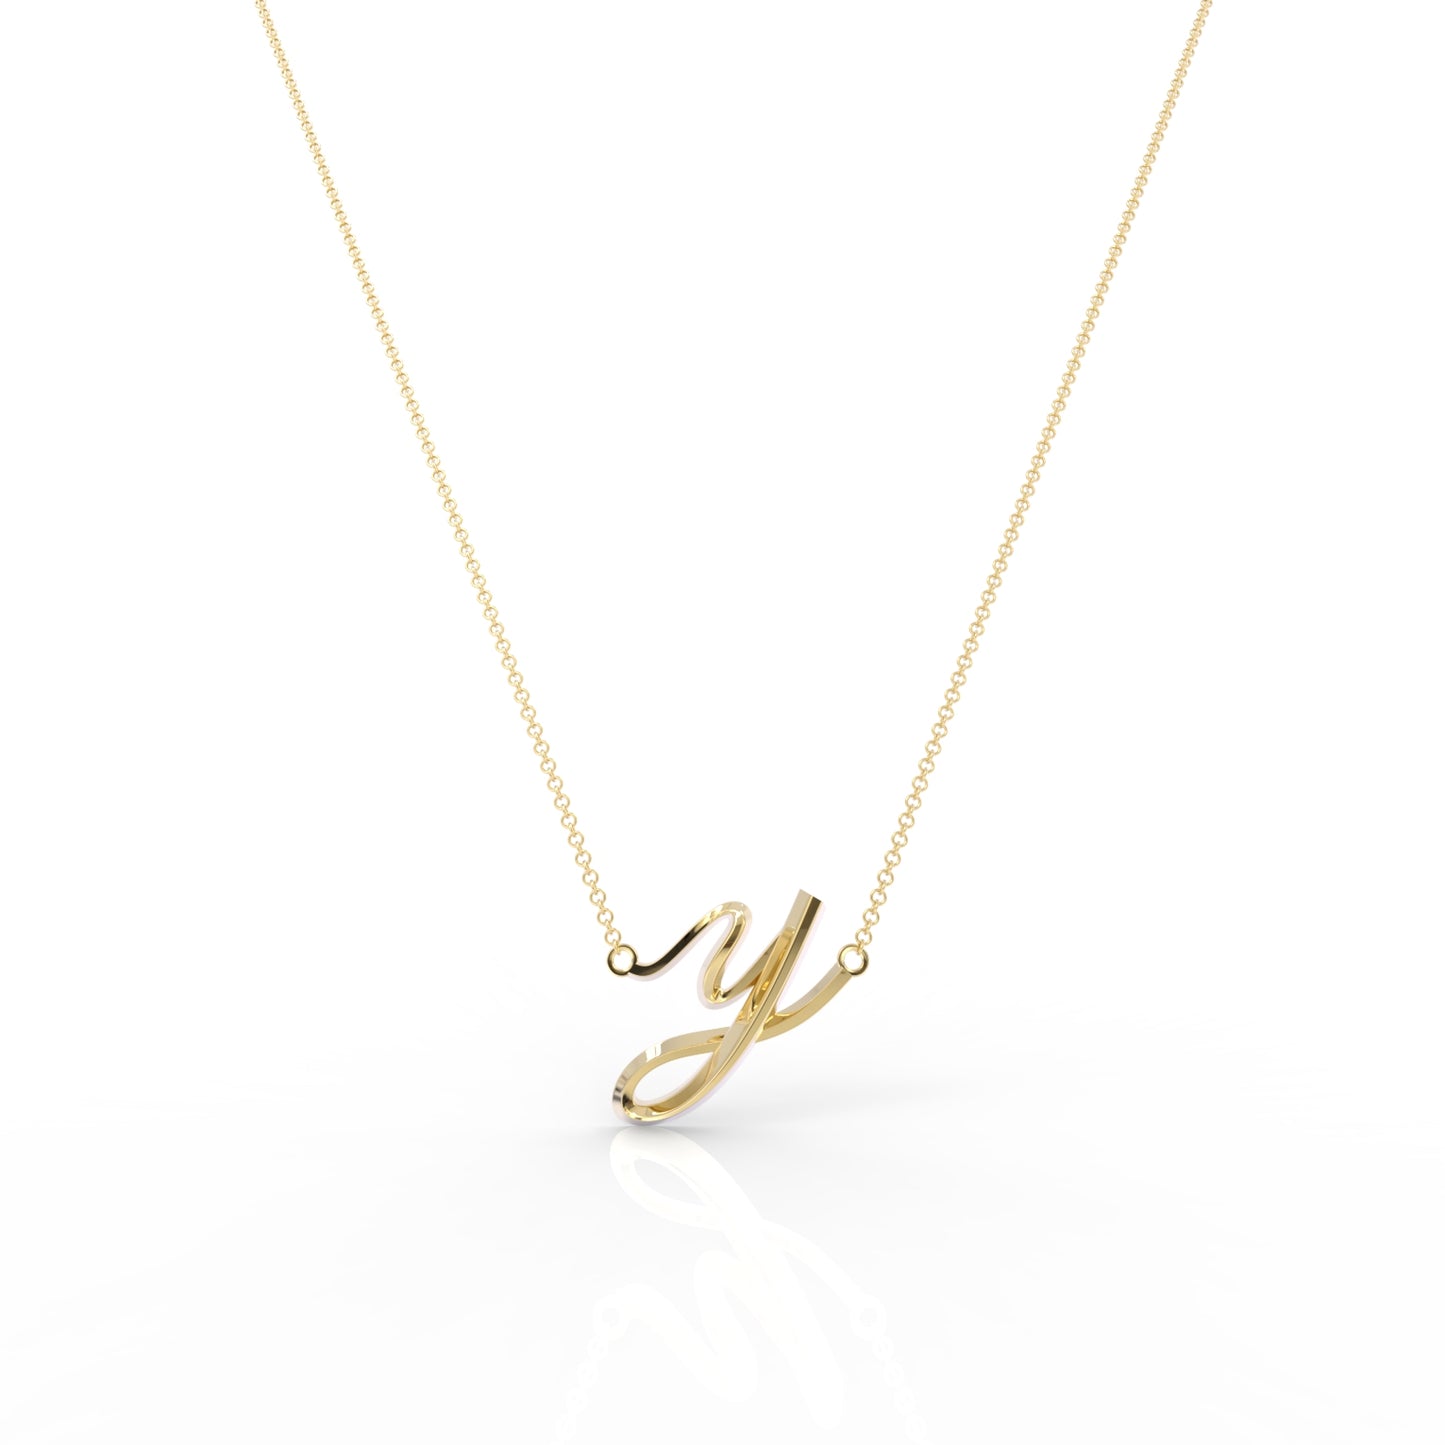 The Love Collect - "Y" Necklace